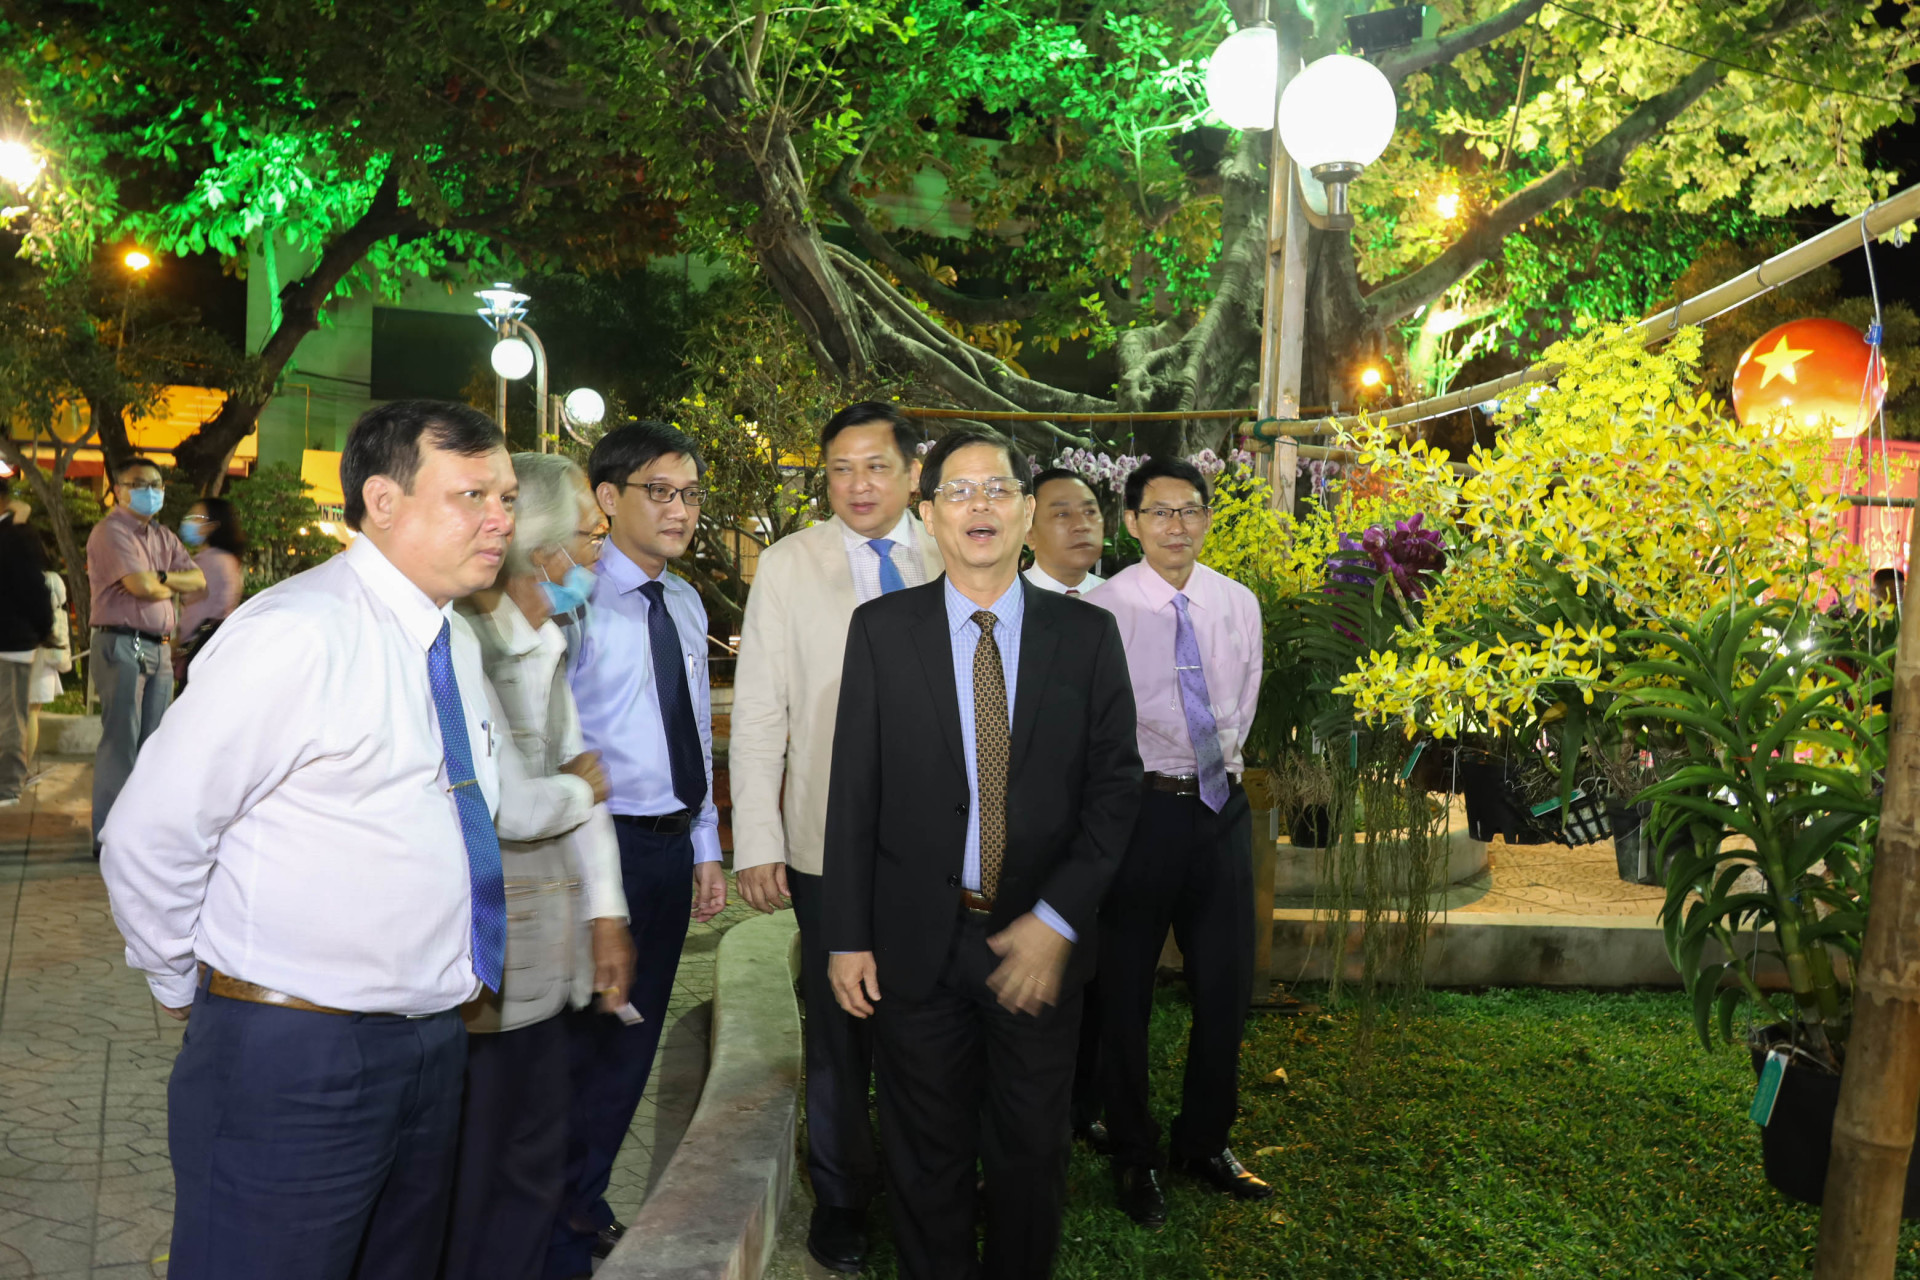 Leaderships of Khanh Hoa Province and Nha Trang City attend Spring Flower Festival 2021